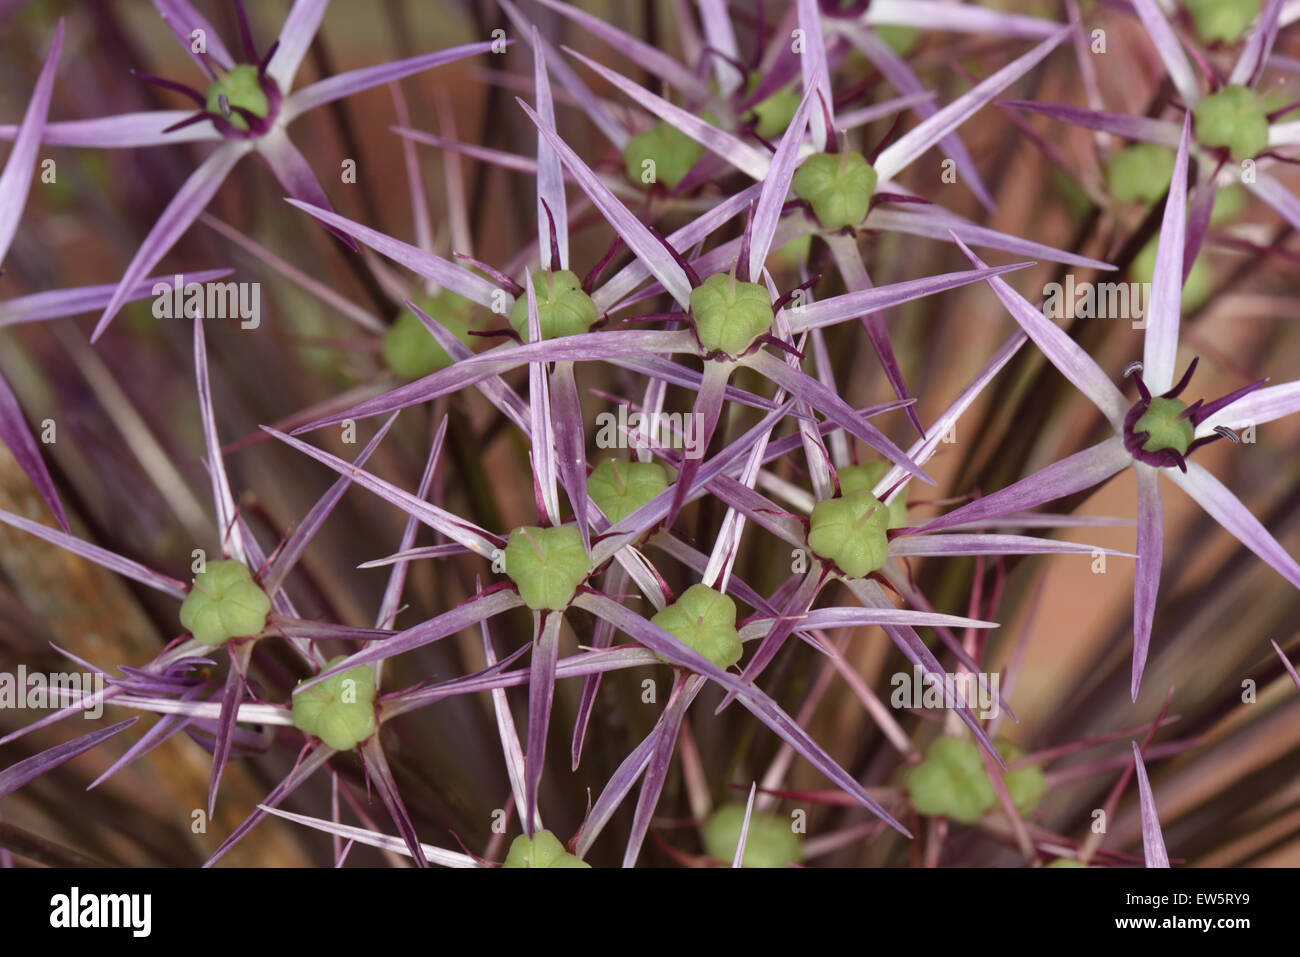 Star shaped flowers of Allium cristophii or star of Persia, purple lilac irridescent florets with green seedpods developing Stock Photo